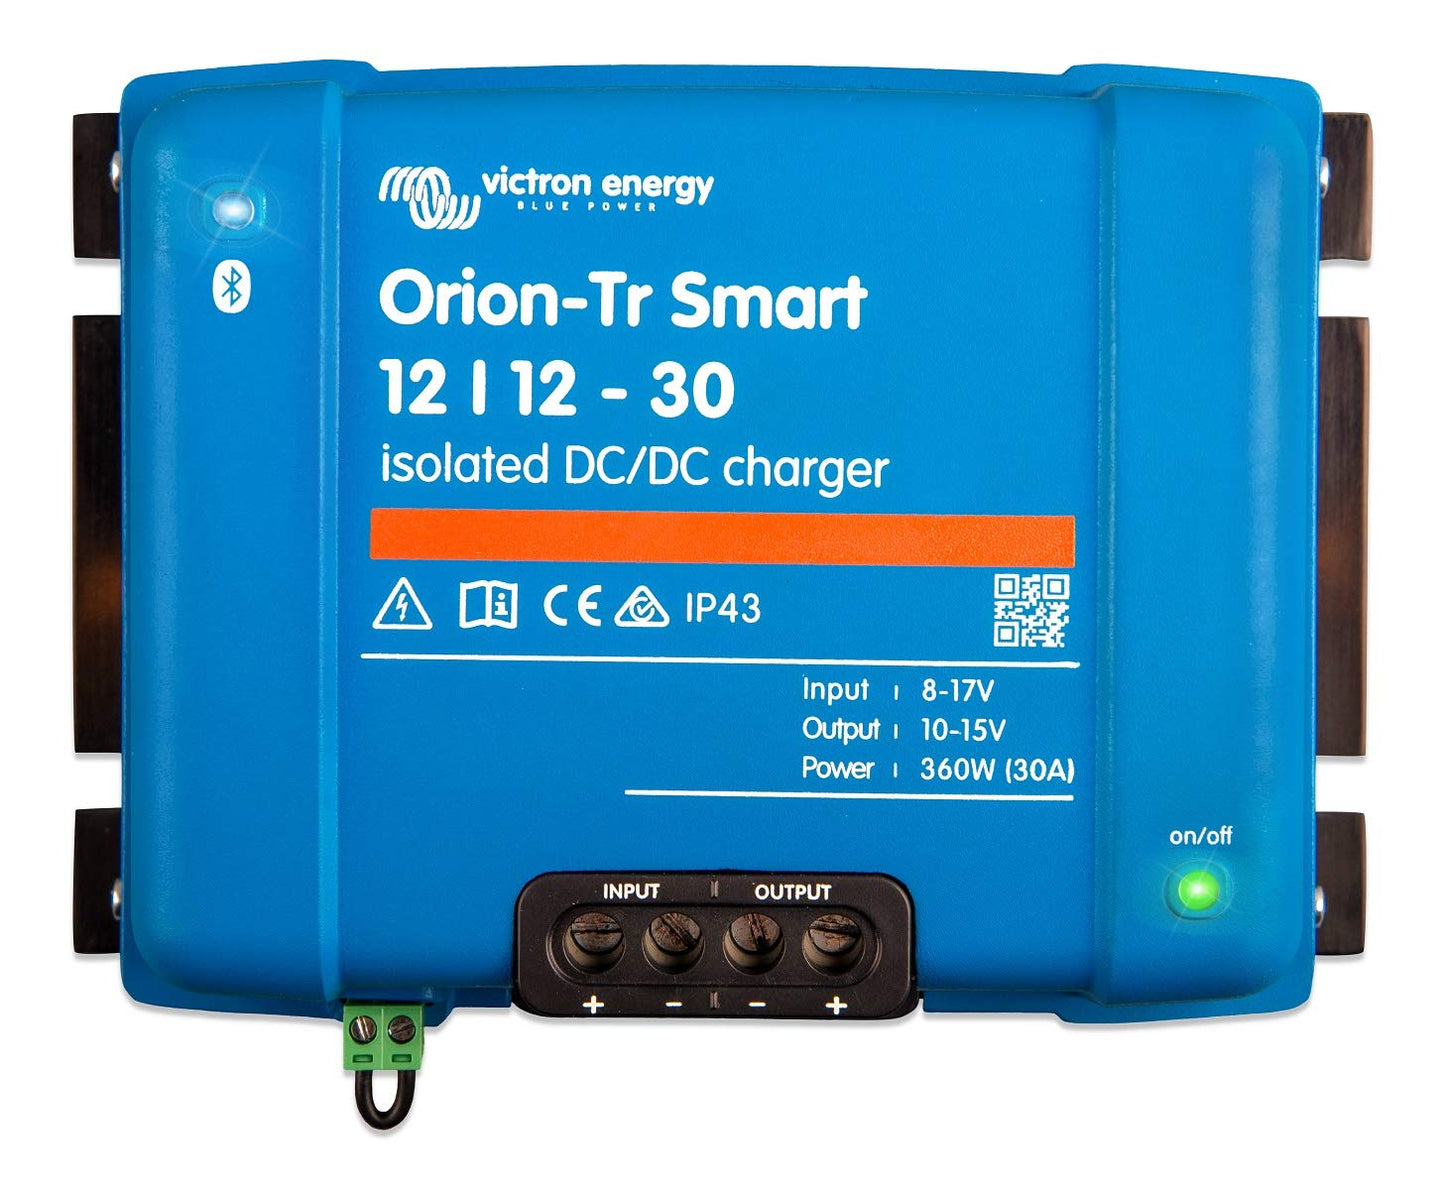 Victron Orion-Tr Smart 12|12-30 DC/DC Isolated